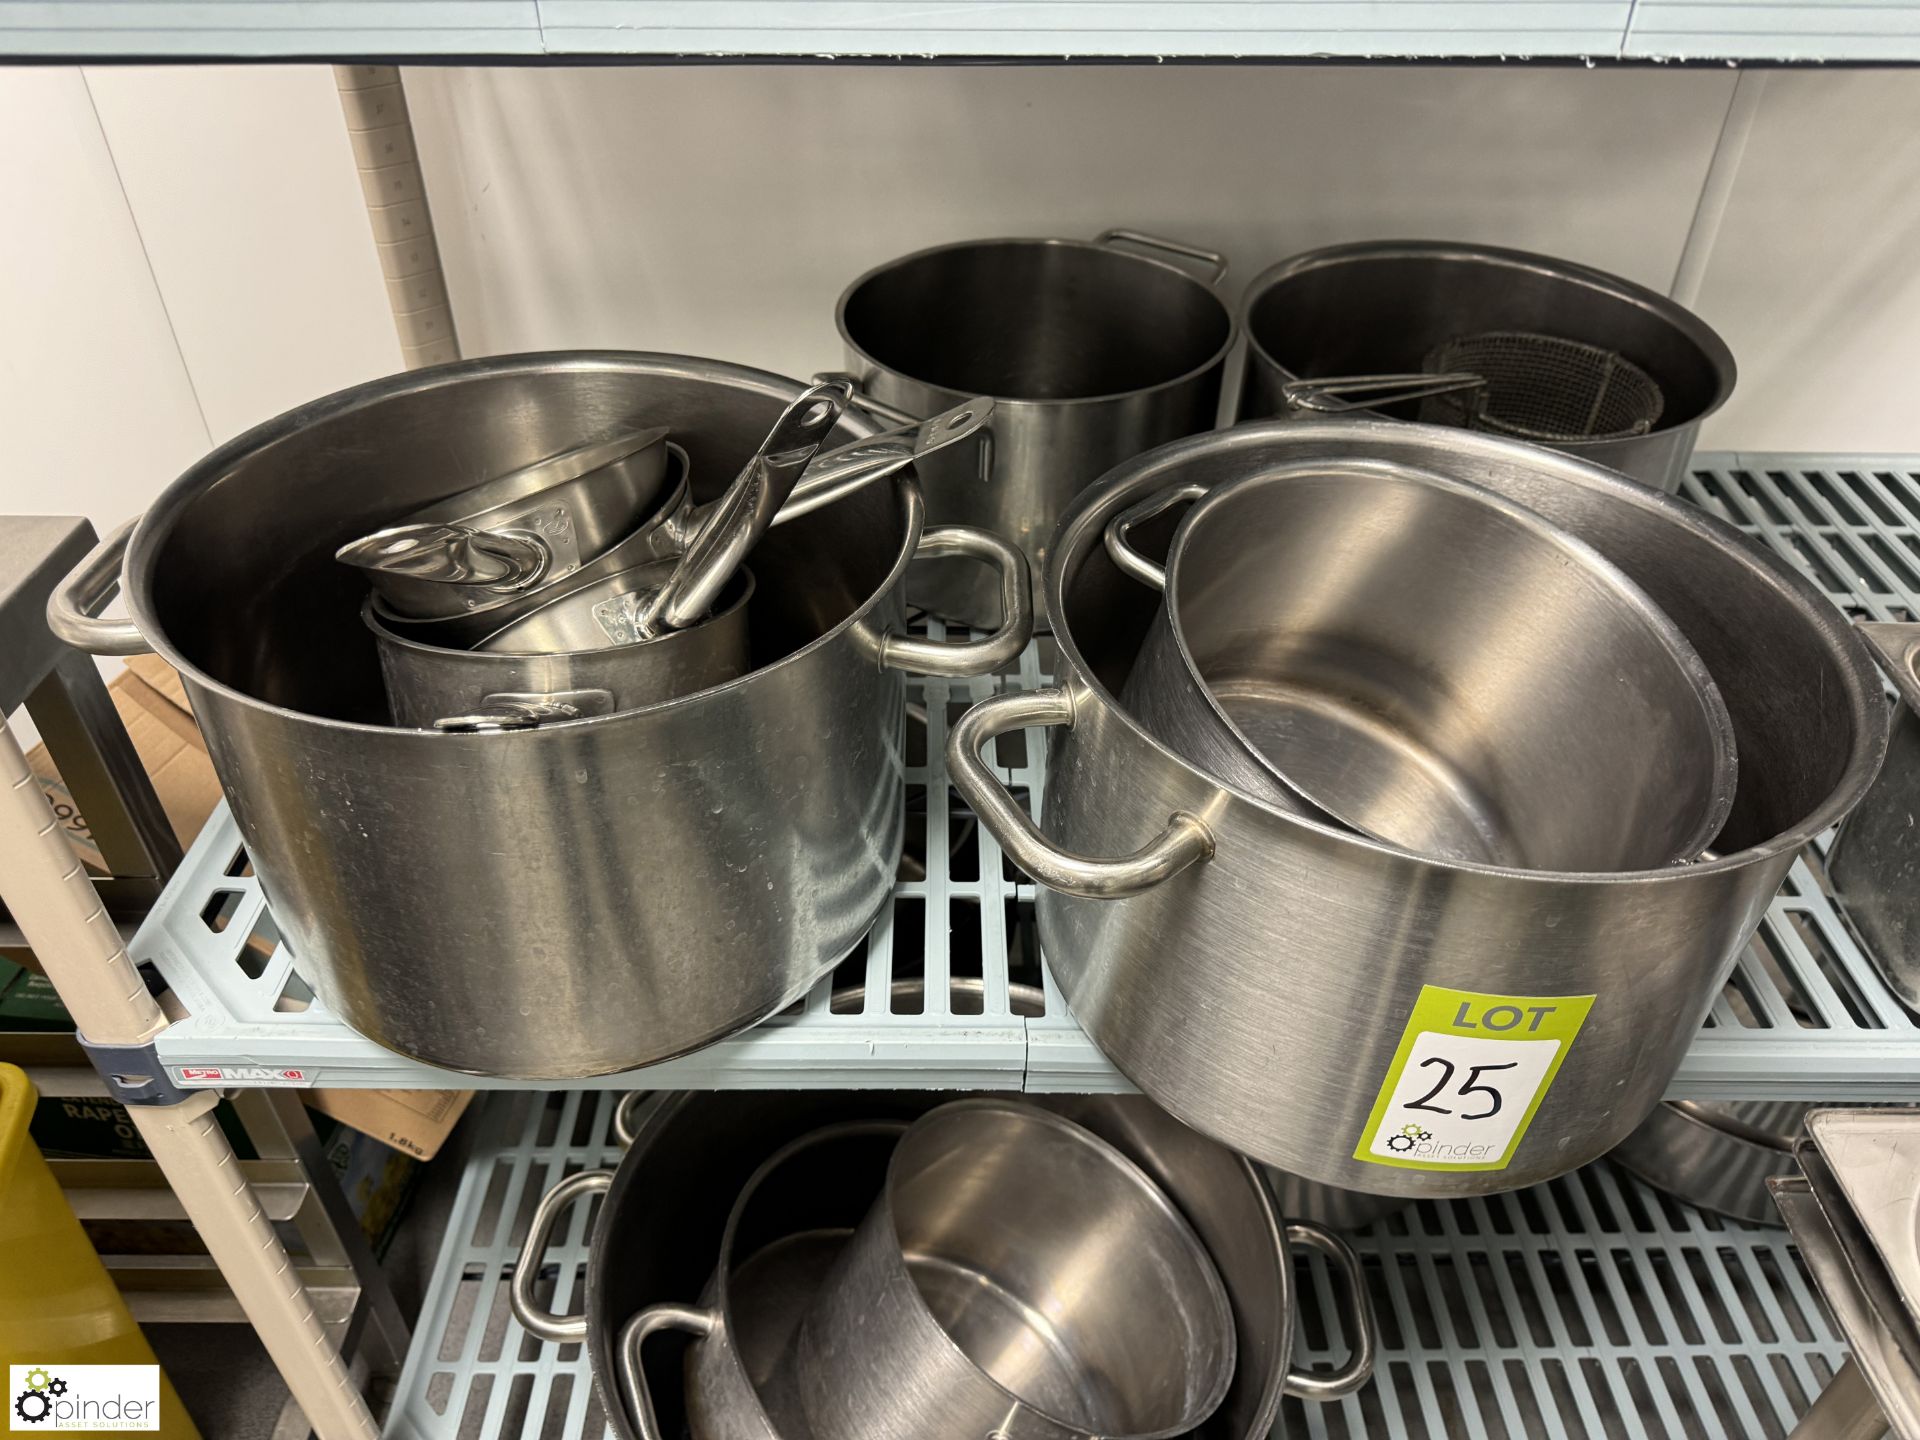 Large quantity stainless steel Cooking Pots, Bowls, Collanders, etc, to rack (rack not included) ( - Image 4 of 6